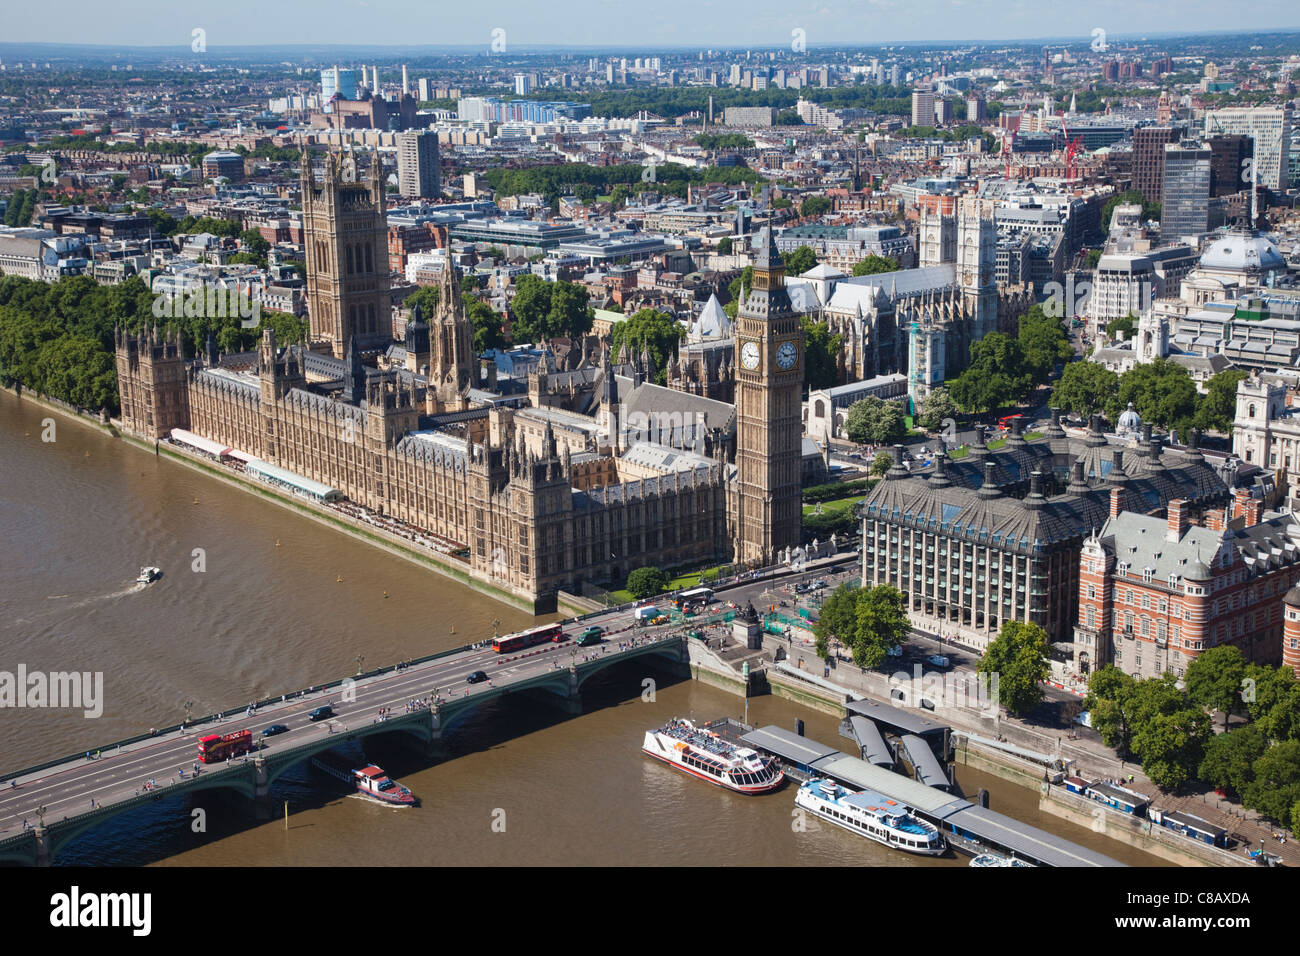 England, London, Palace of Westminster and River Thames, View from the London Eye Stock Photo